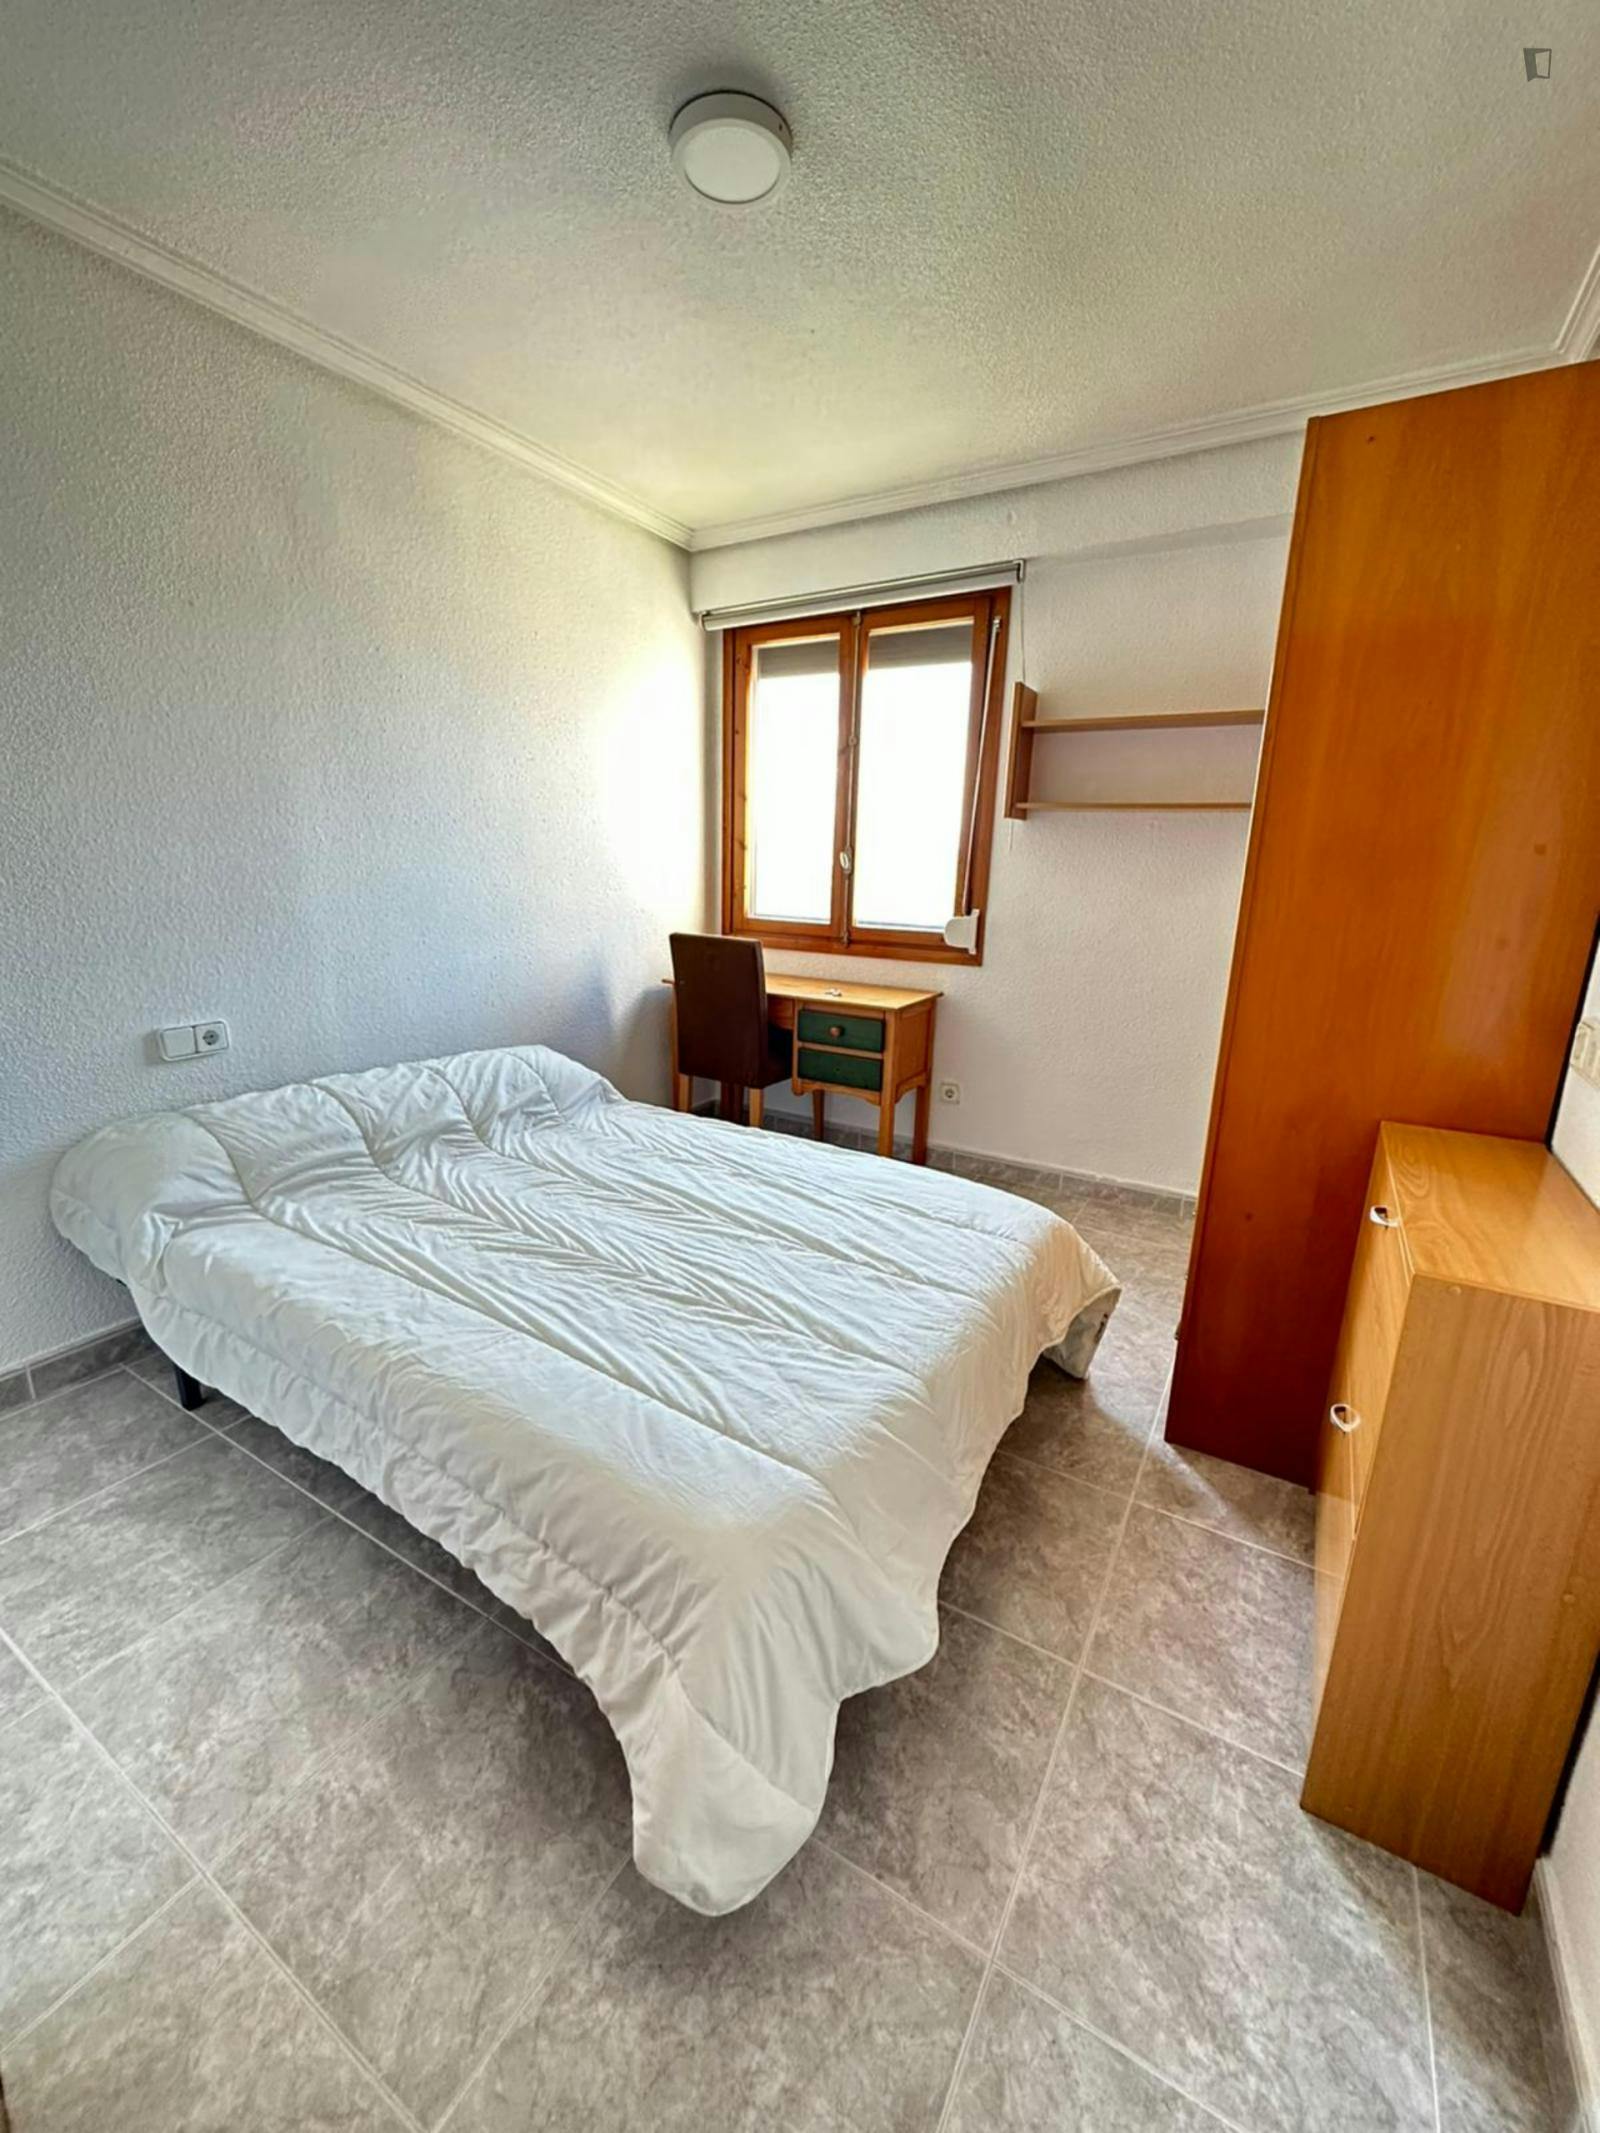 Bright double bedroom in Alicante close to Alacant Terminal train station